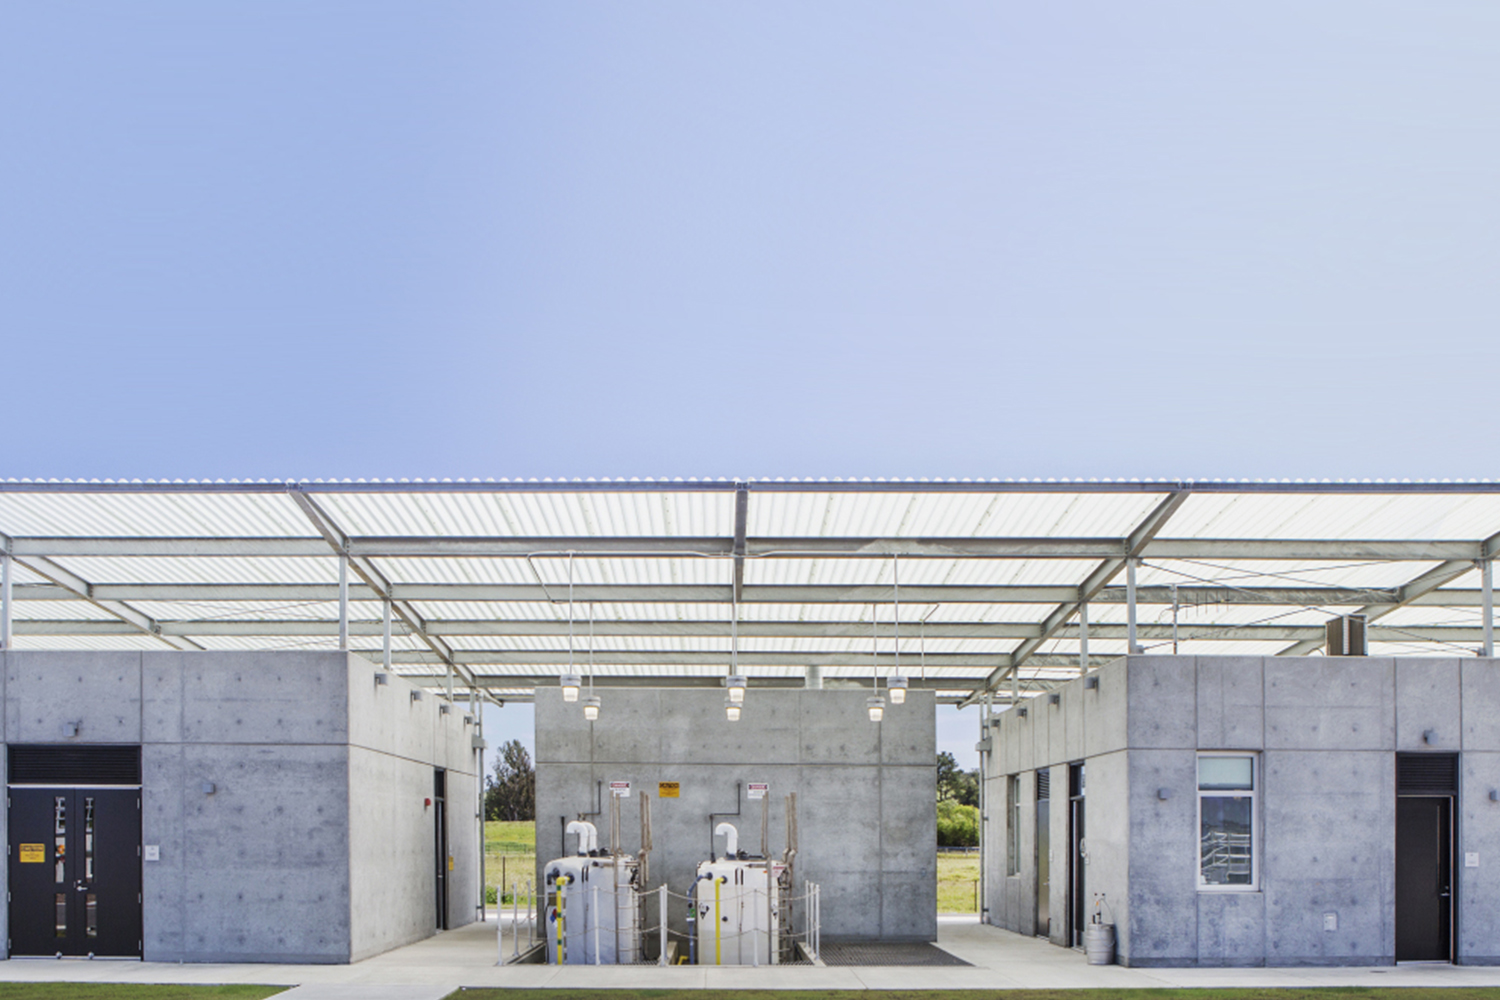 07_Projects_Waste Water Treatment Facility.jpg